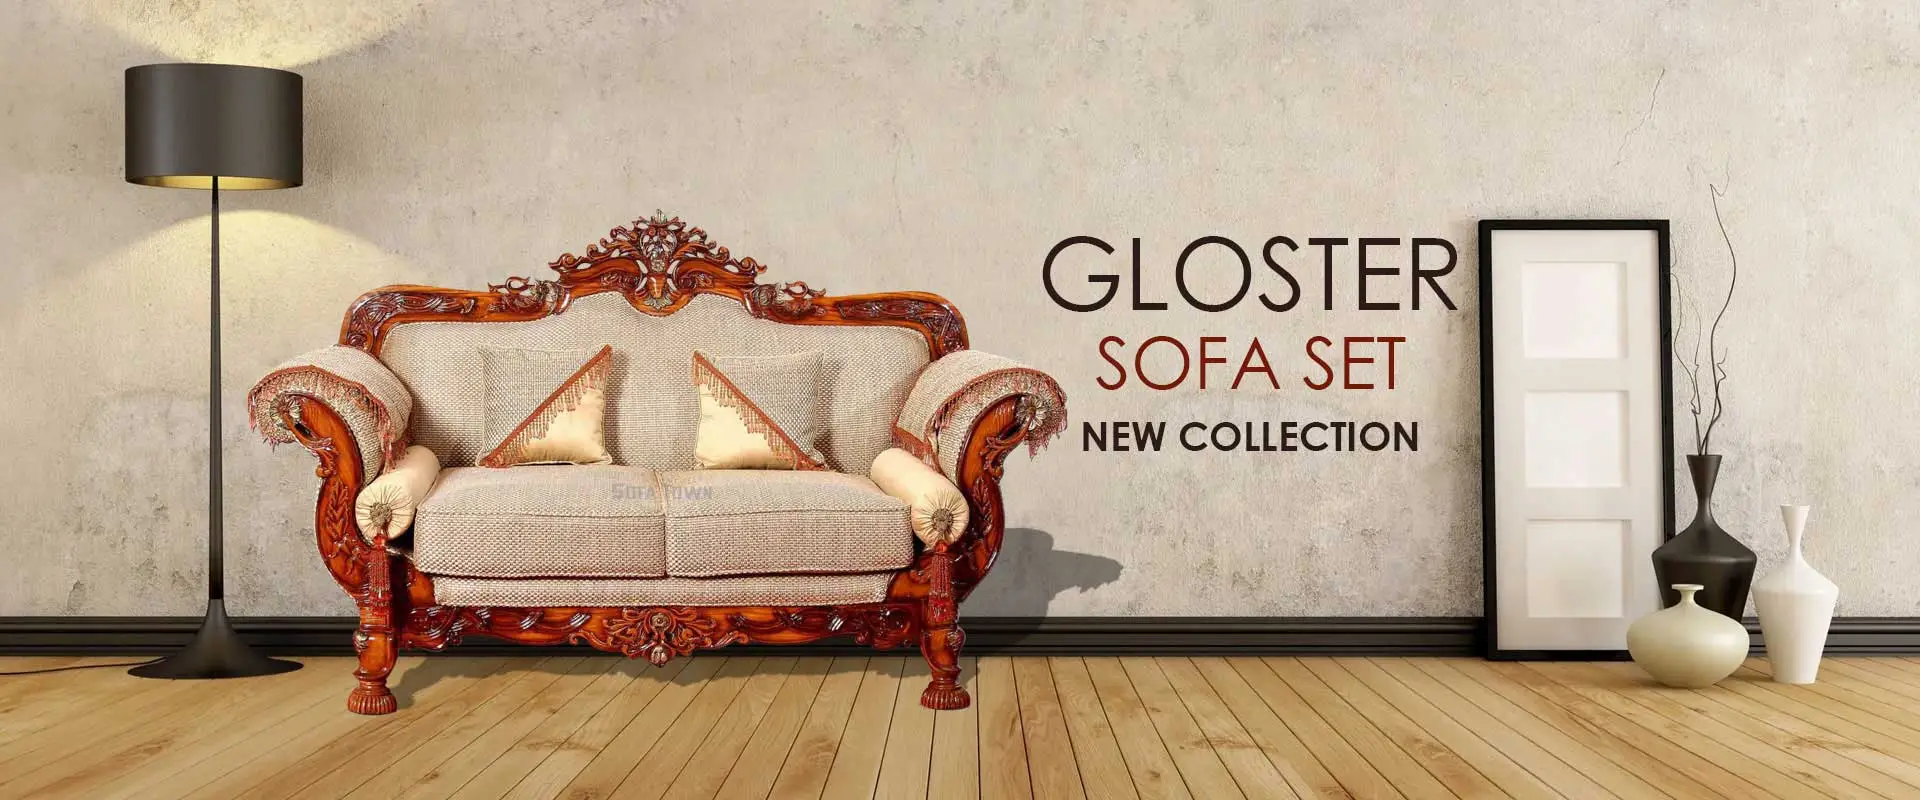 Gloster Sofa Set  Manufacturers in Jalor